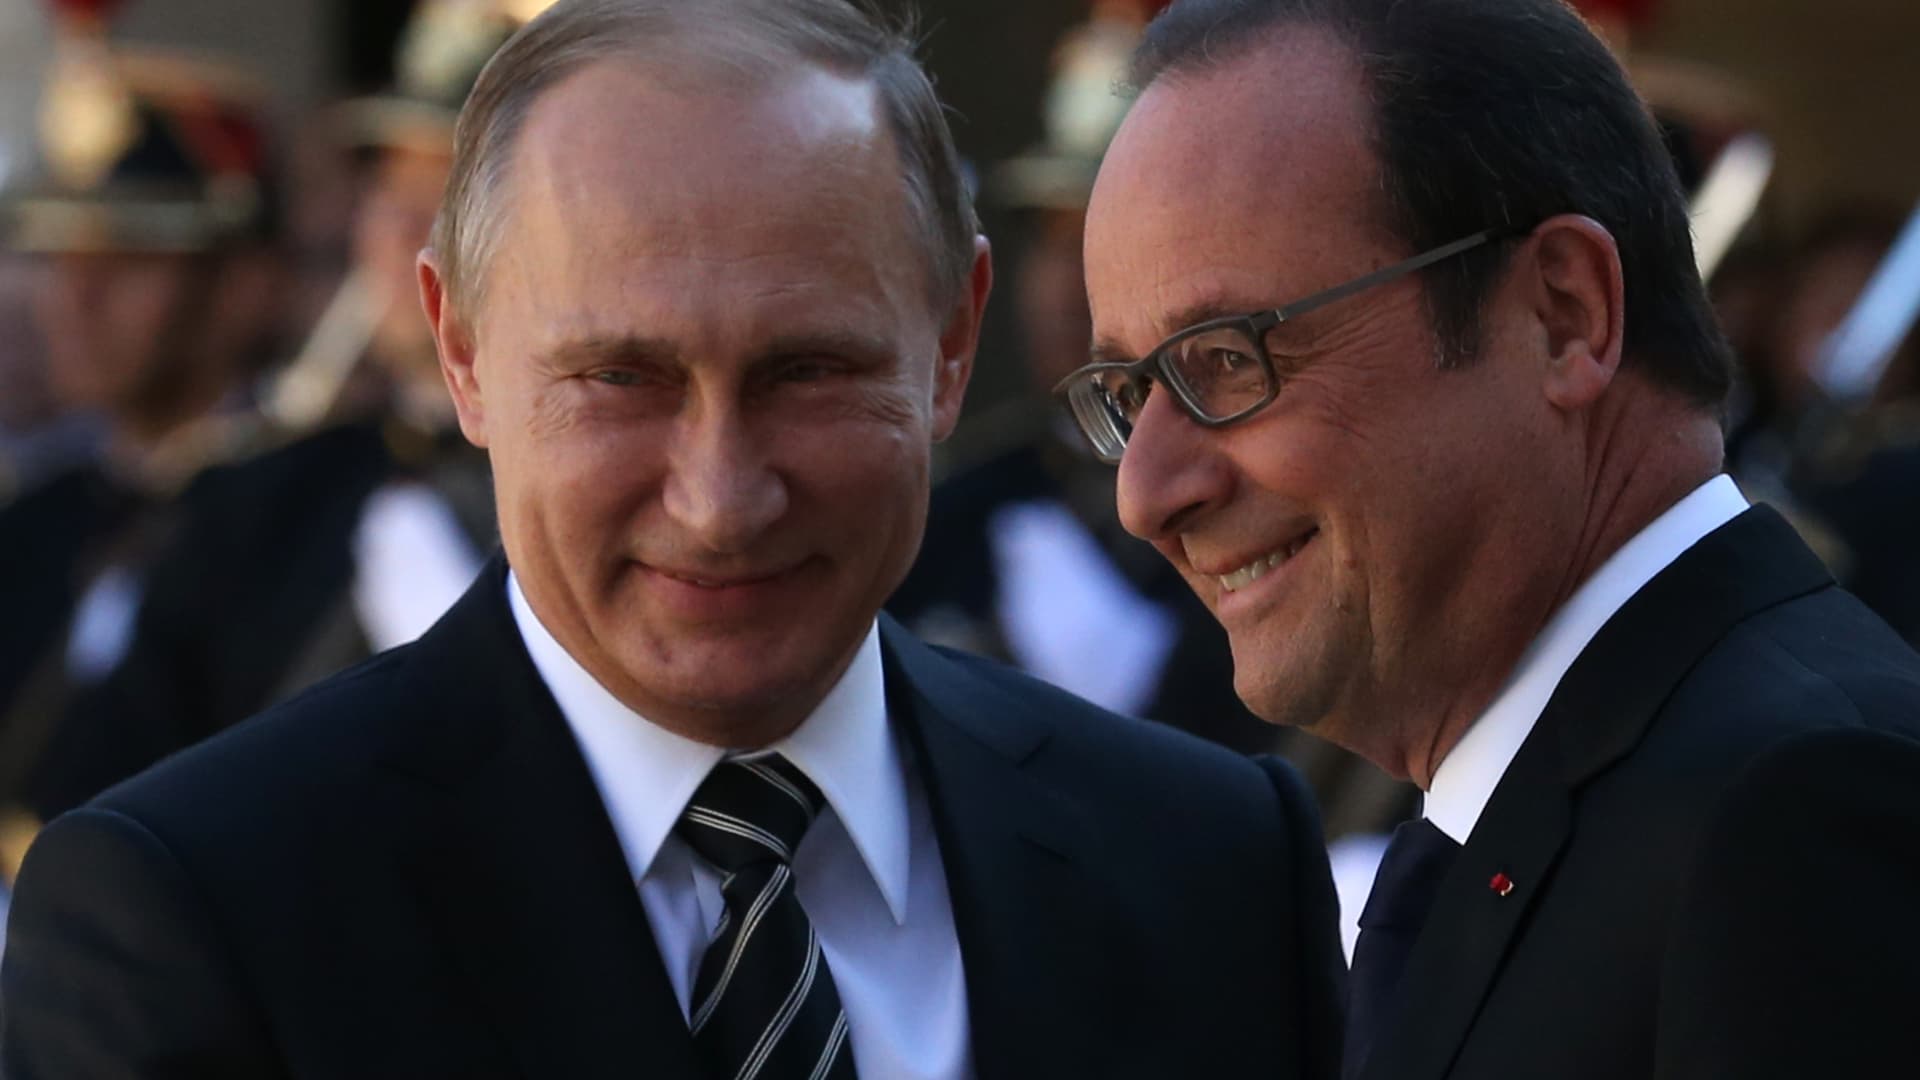 Putin meets Hollande: France and Russia getting closer